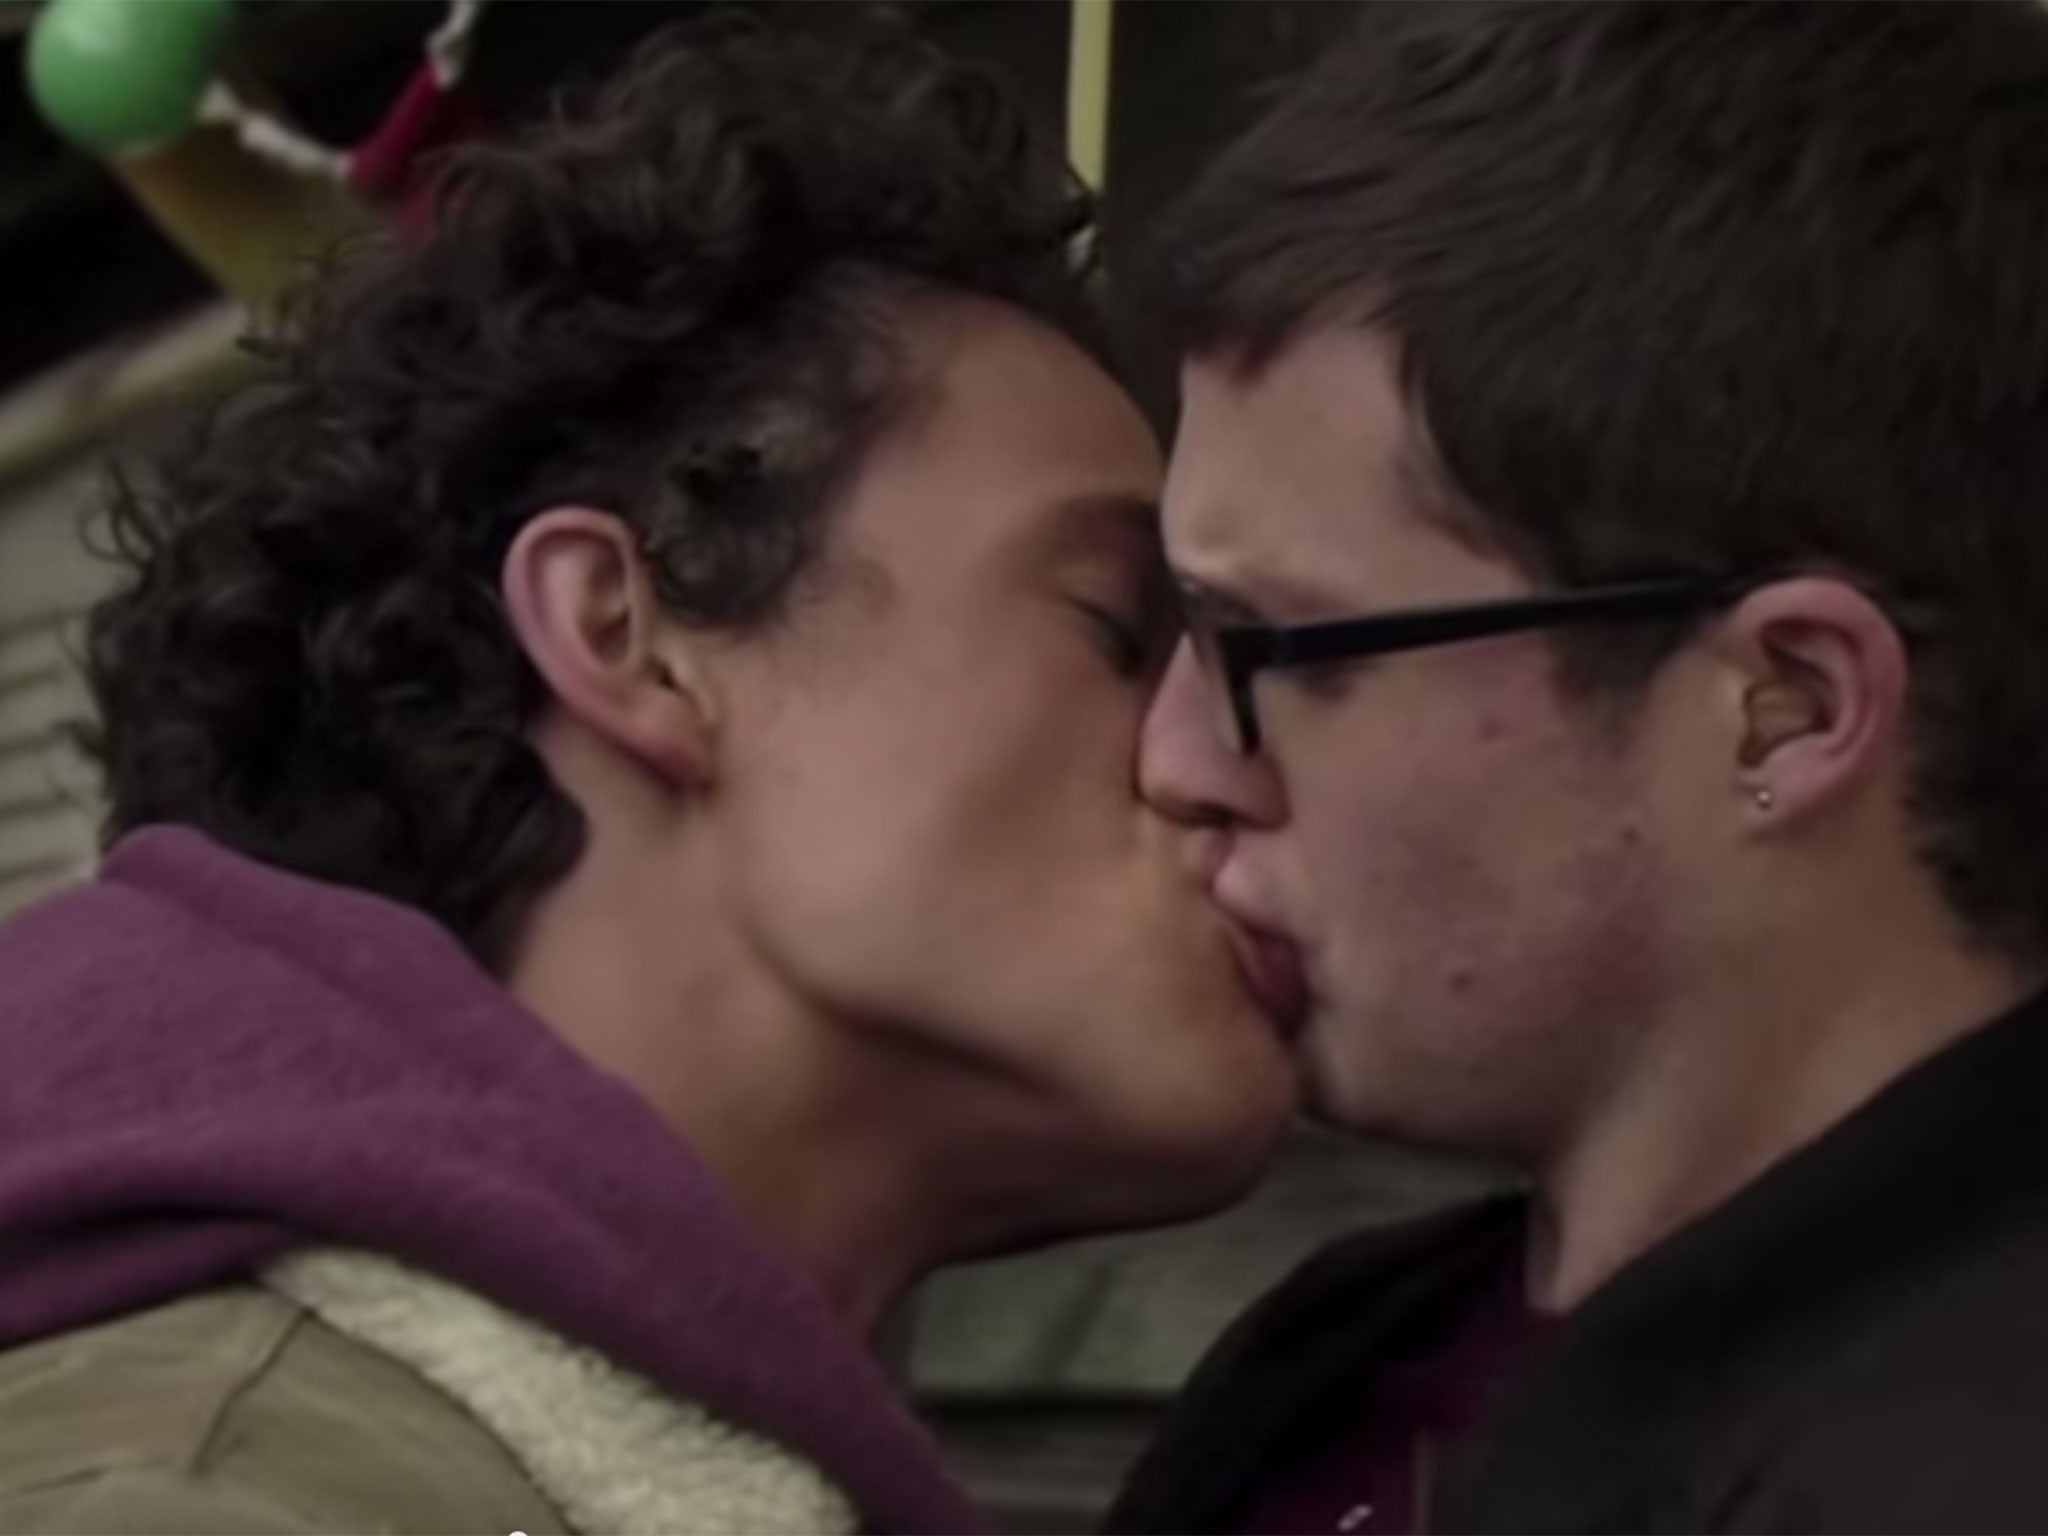 Ben Mitchell and Jonny Labey's gay kiss on EastEnders has divided Twitter